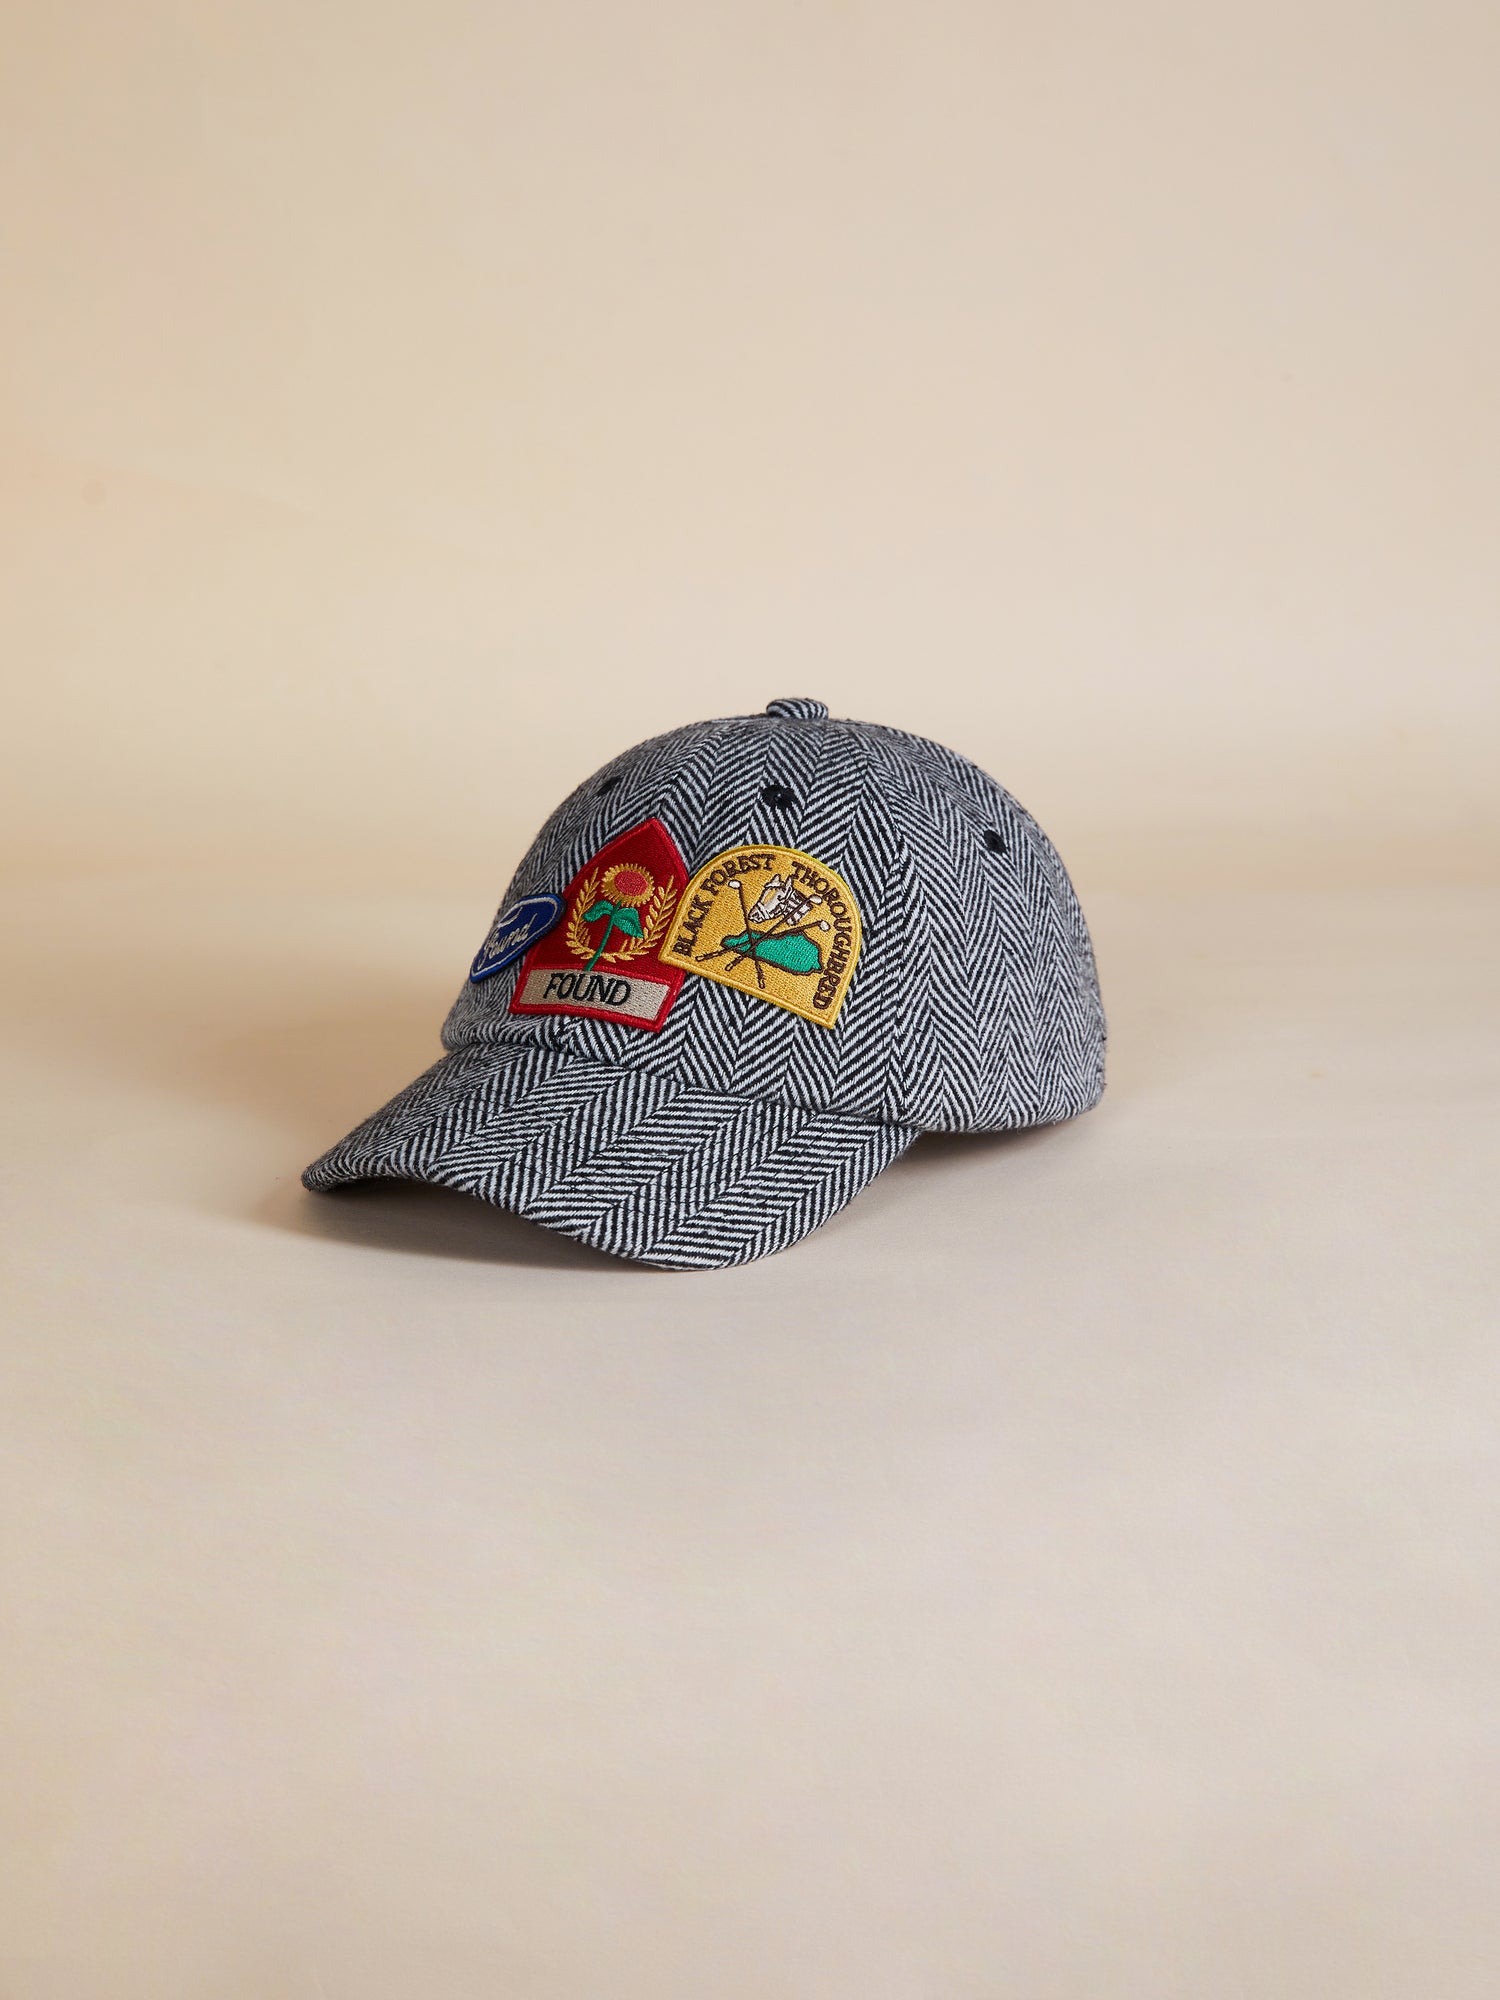 A Herringbone Tweed Patch Cap from Found, with embroidered patches on it.